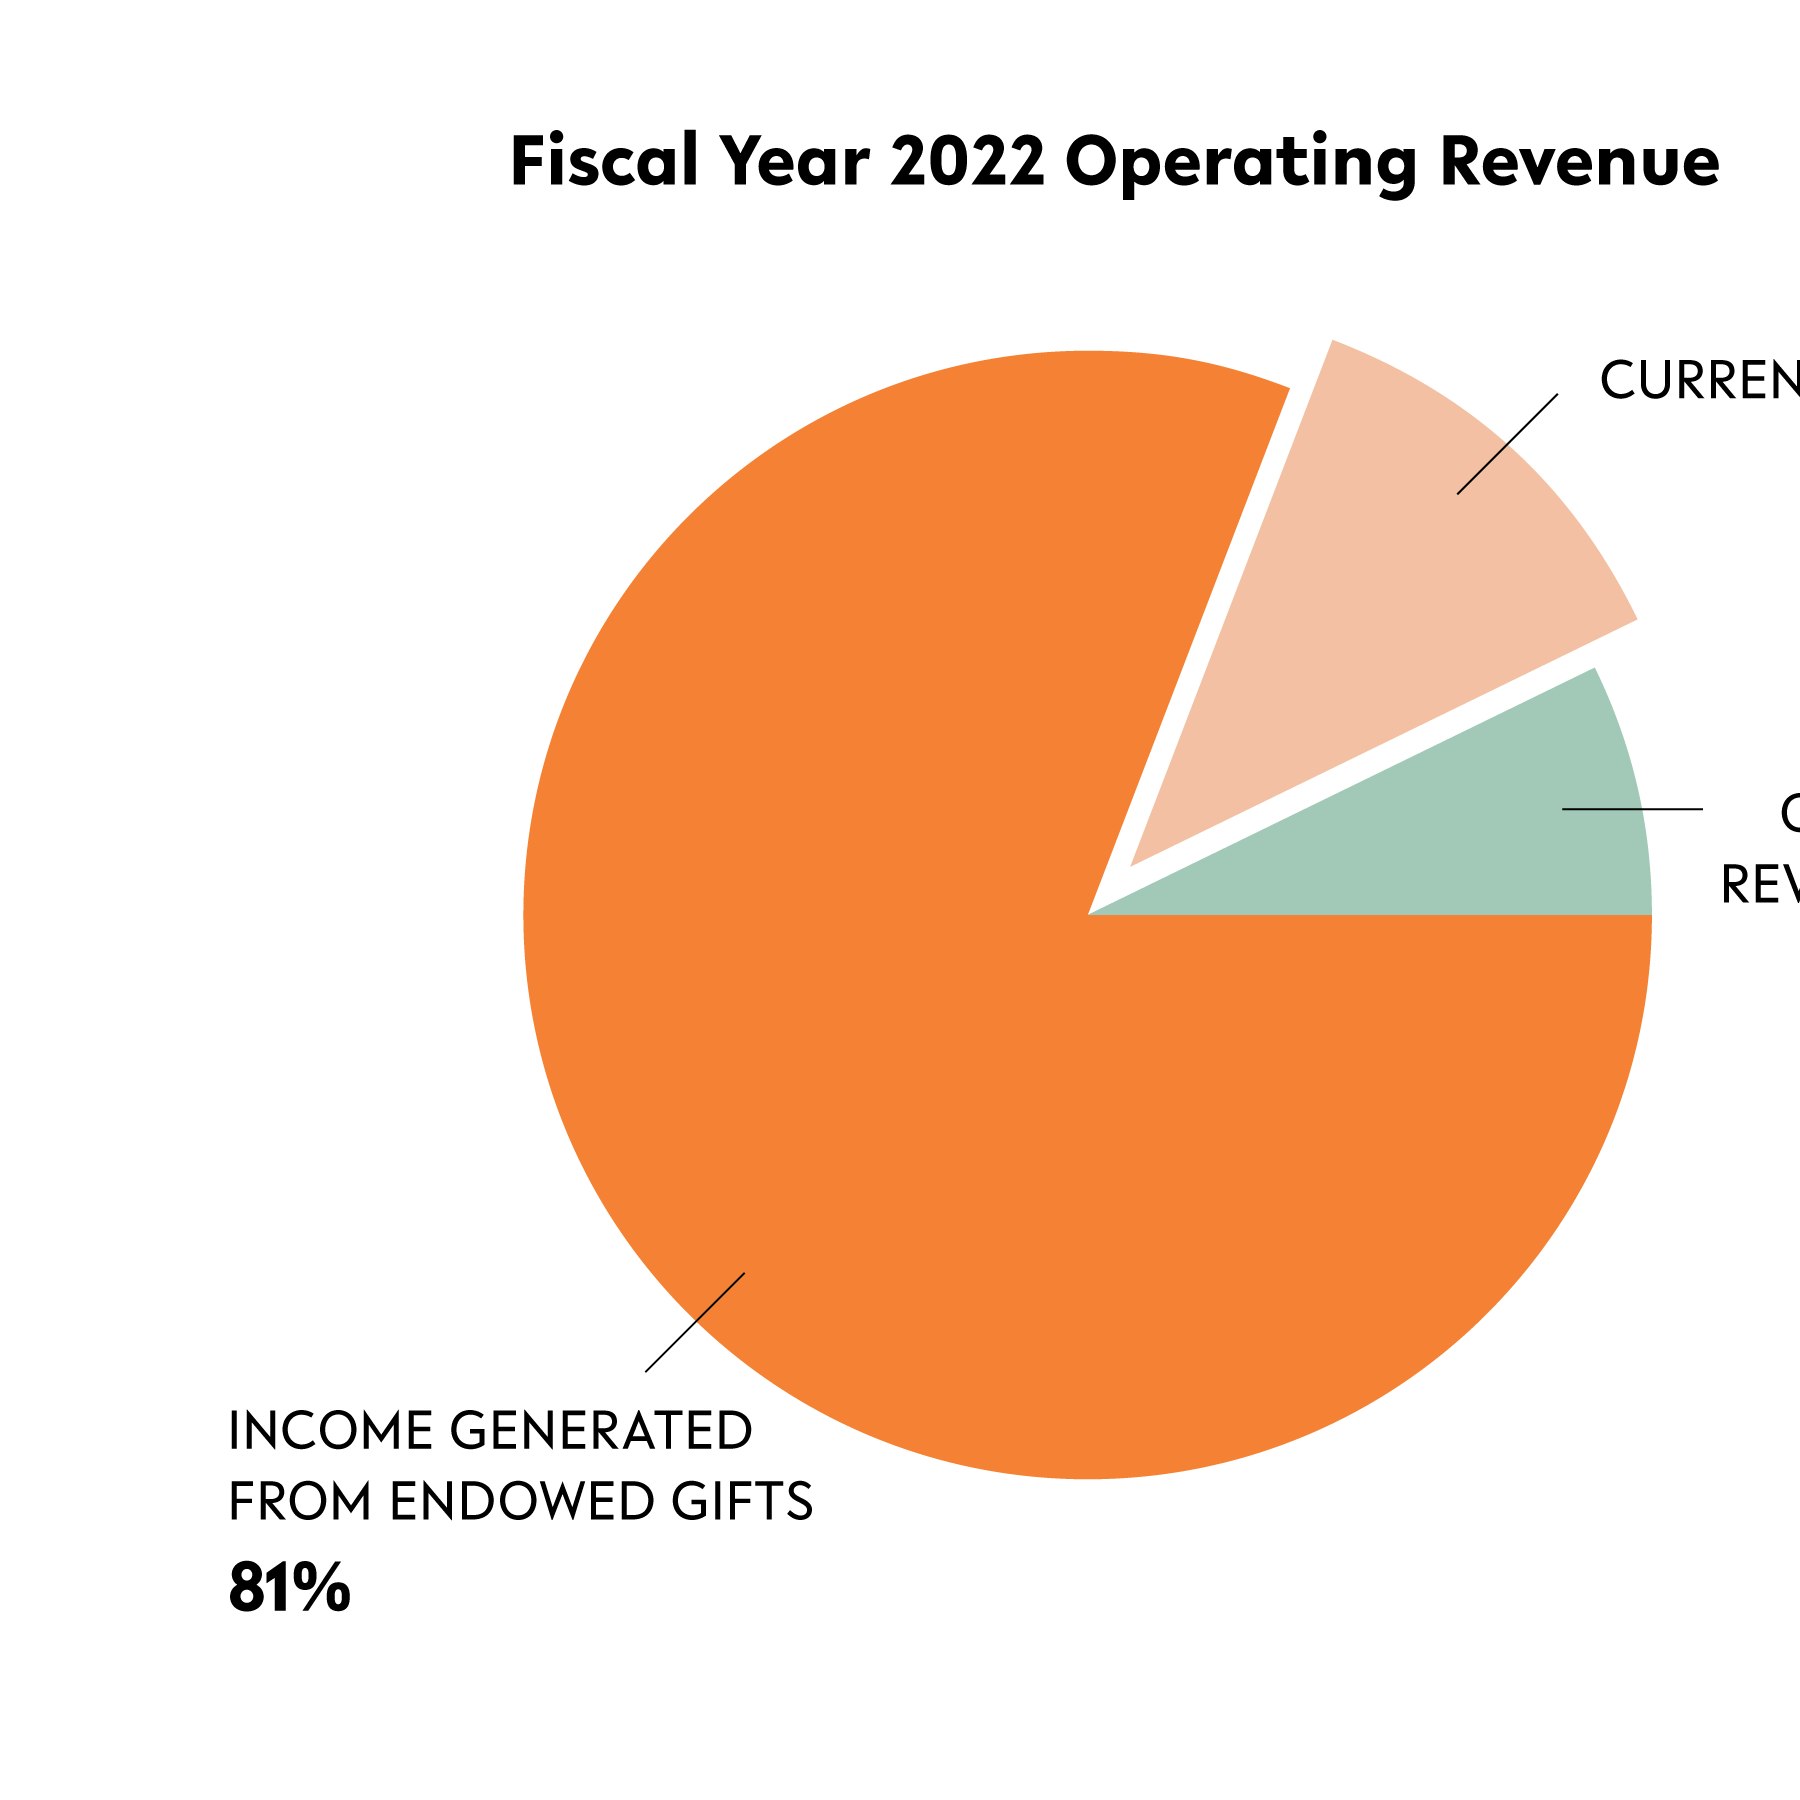 Fiscal year 2022 operating revenue